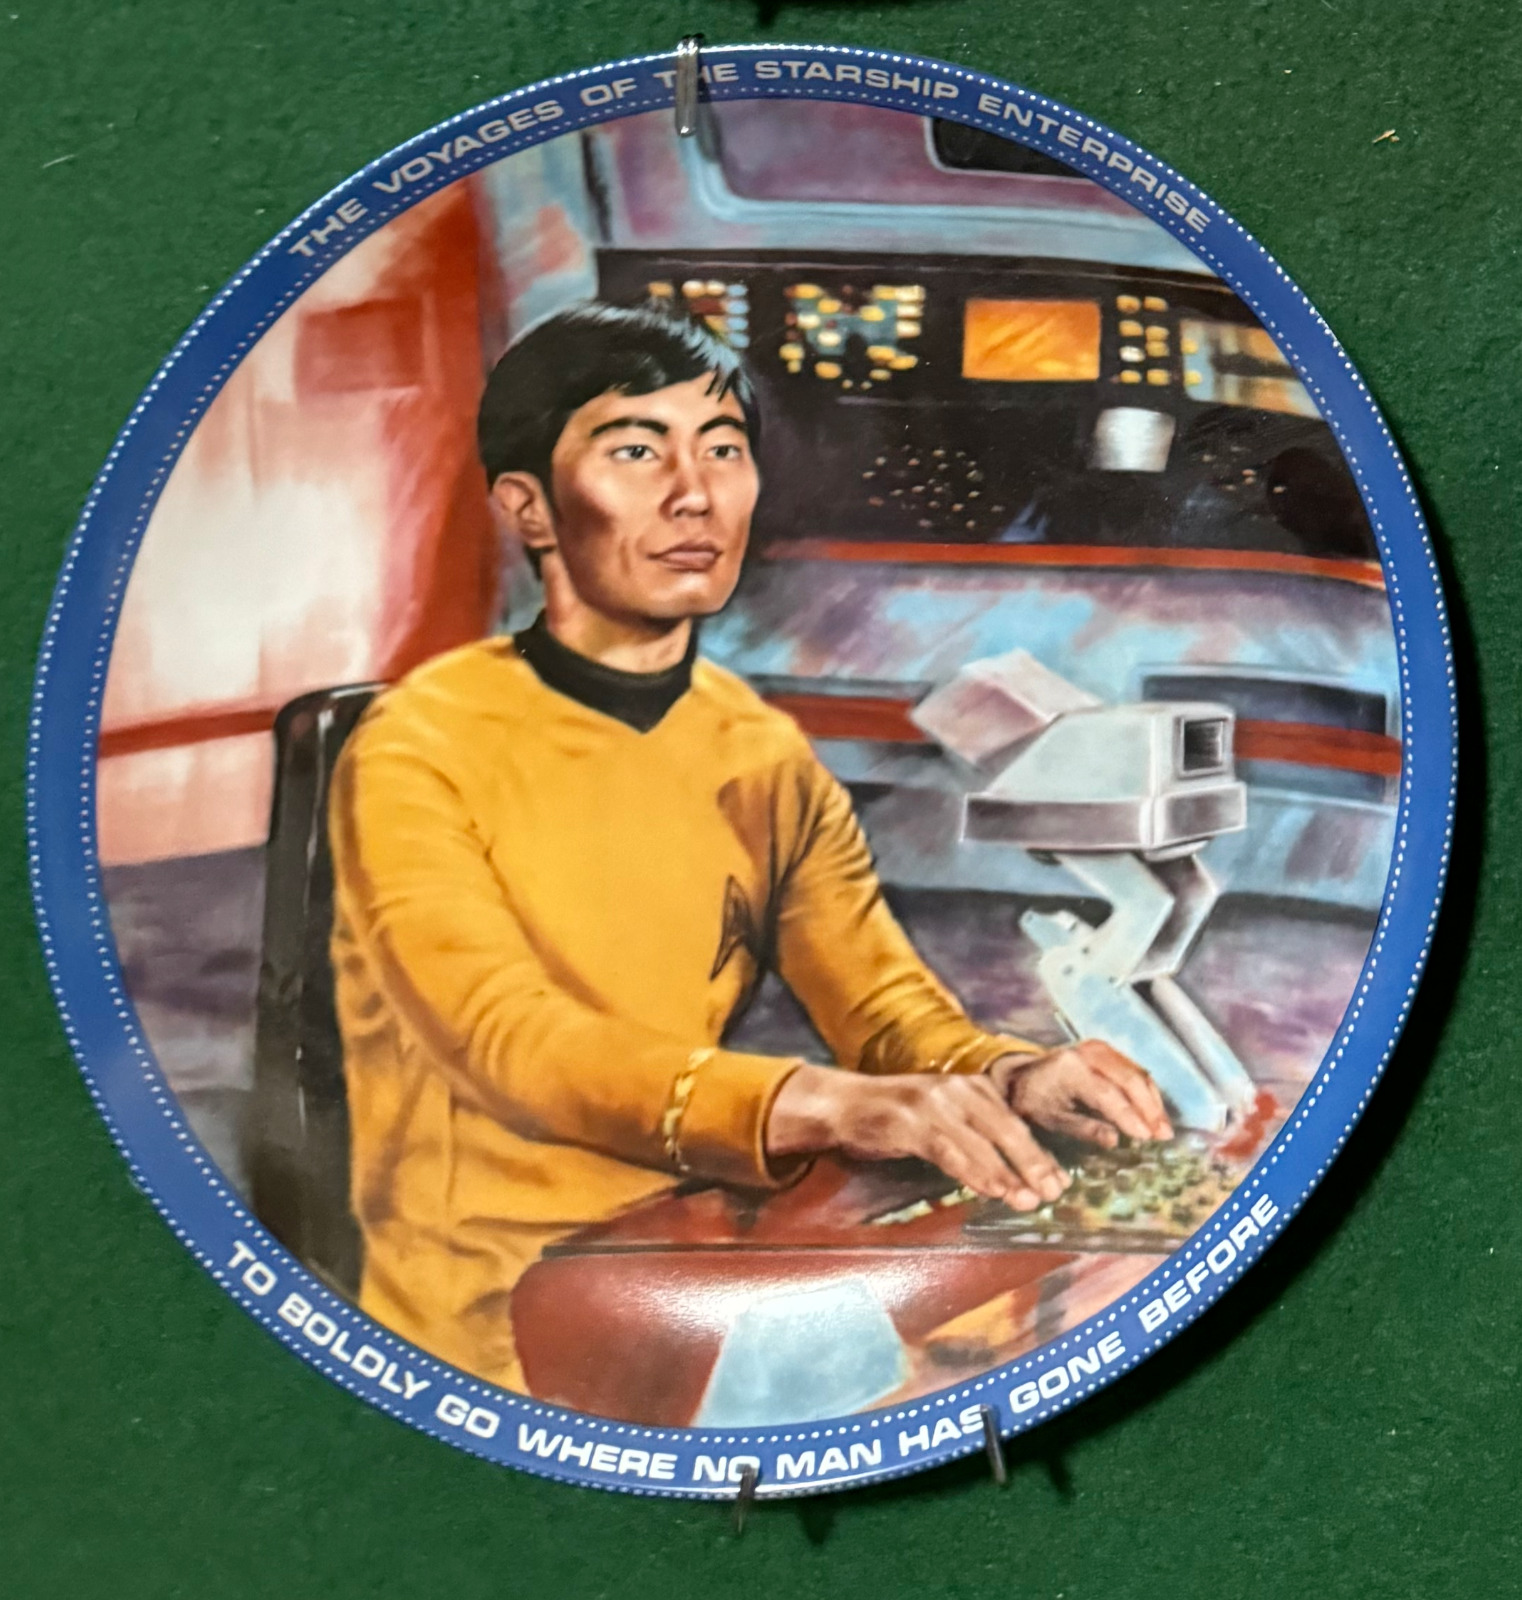 Vintage Limited Edition Star Trek Plate - Sulu From The Hamilton Collection NWOB